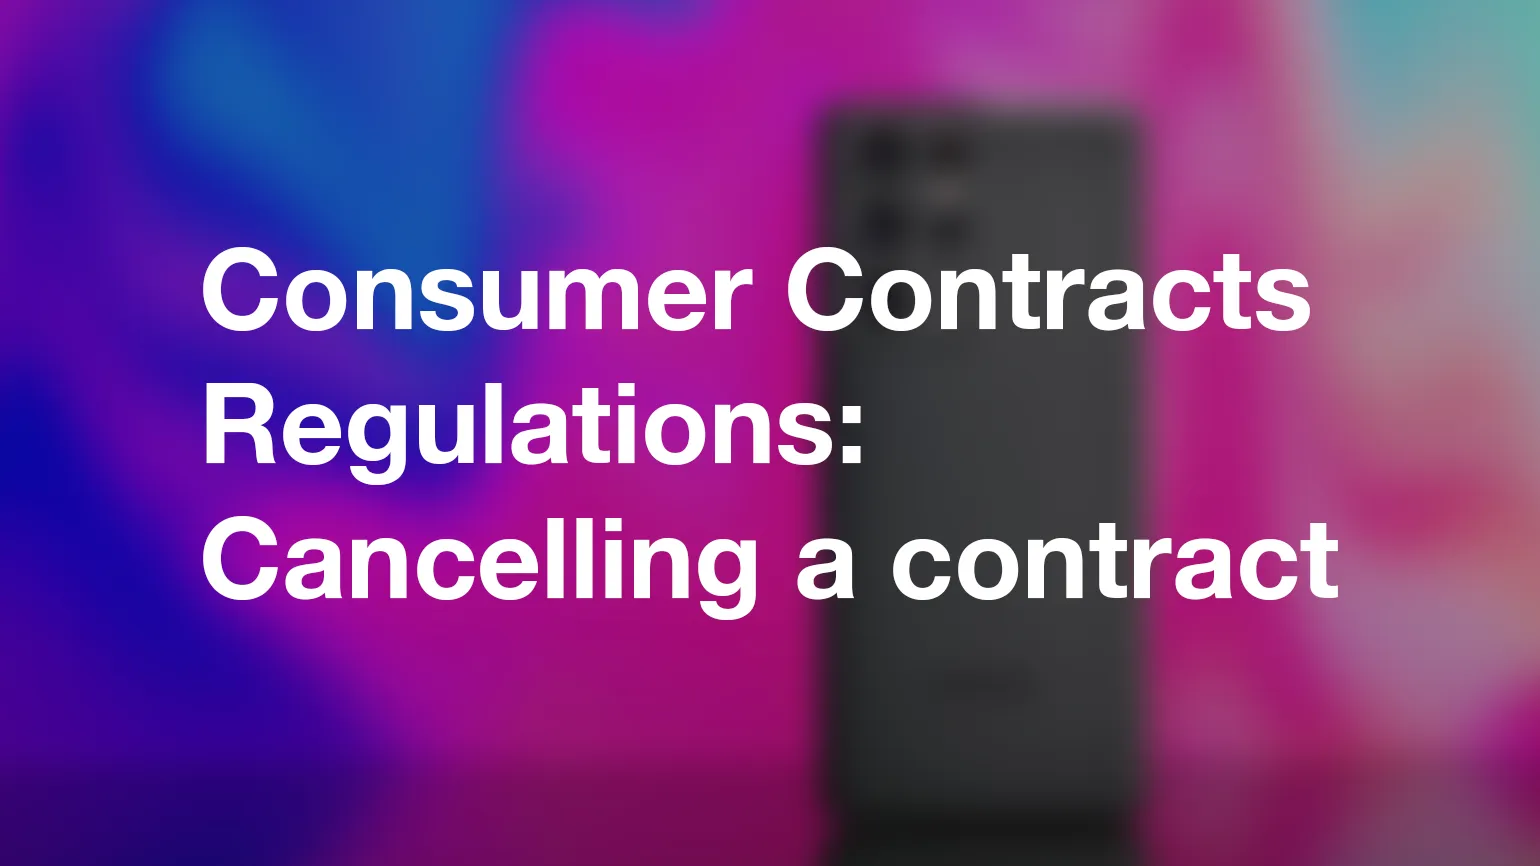 Can I cancel a contract when purchased online?